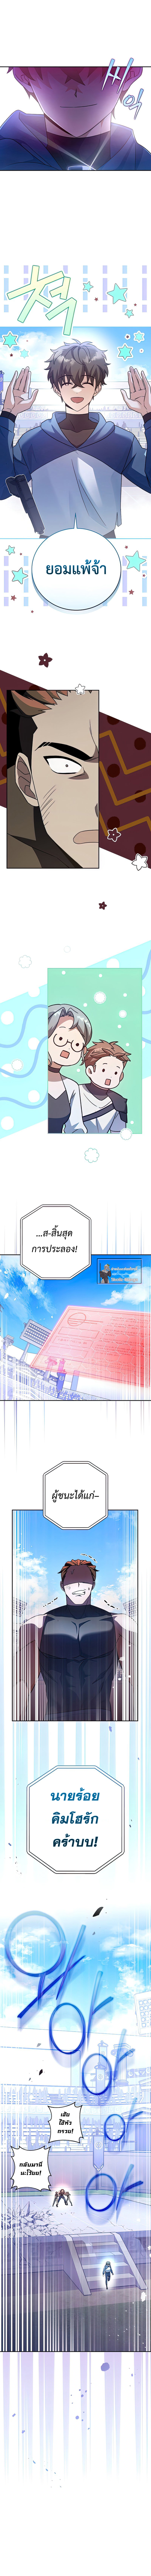 The Novel's Extra Chapter 32 (2)